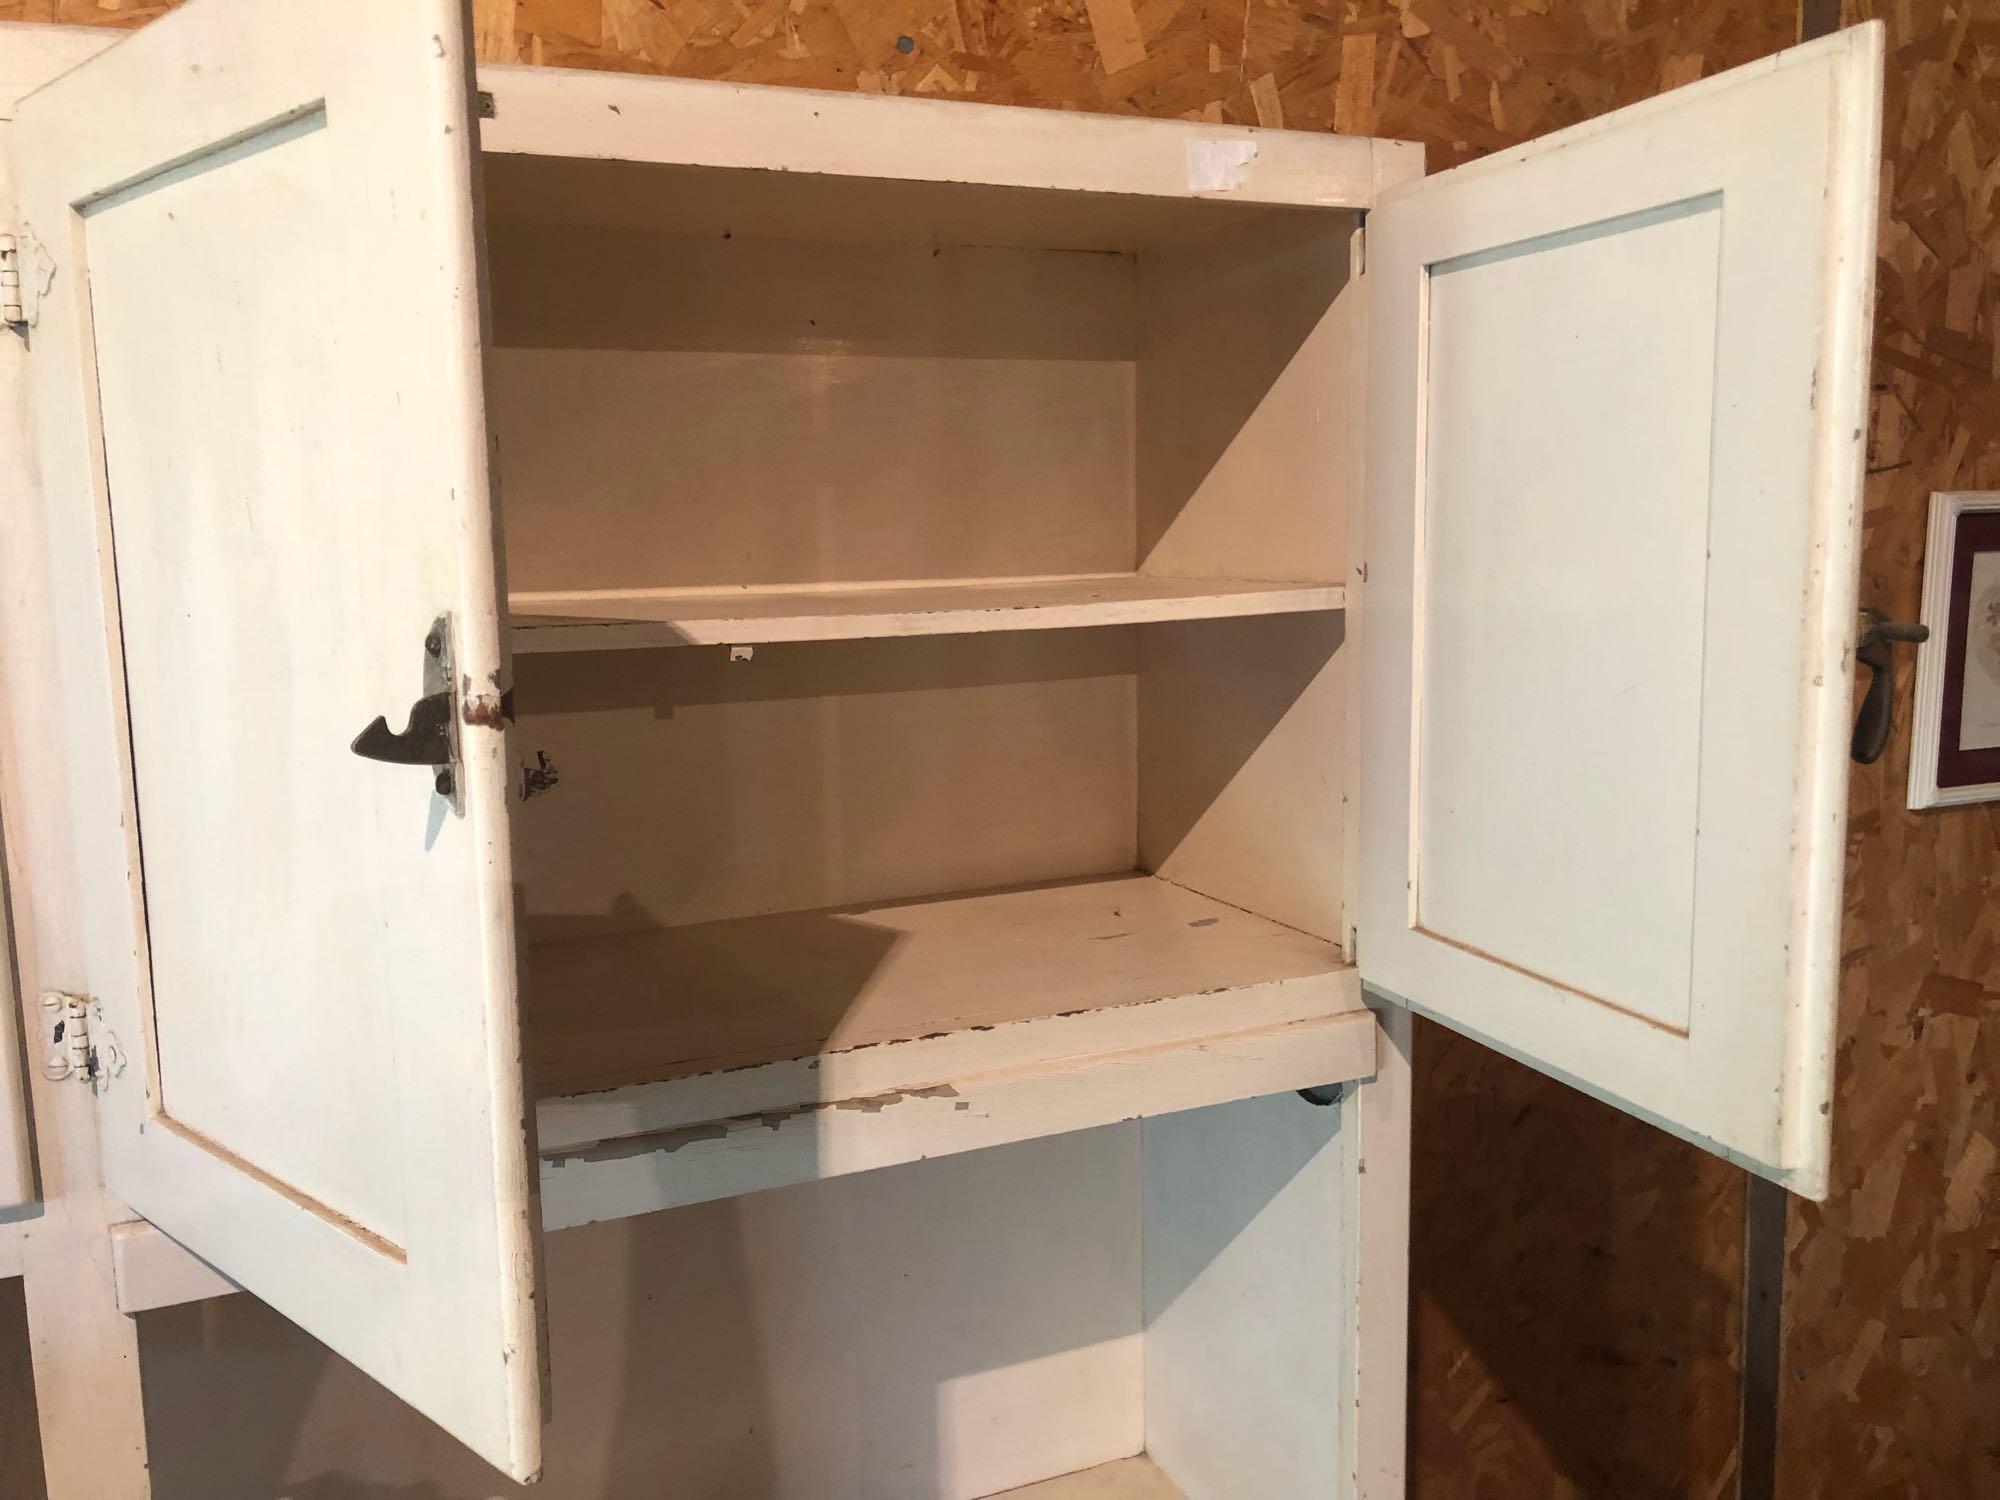 40.5'' W x 21.5'' D x 69'' H antique kitchen cupboard w/flour sifter, flour bin, and pull-out enamel